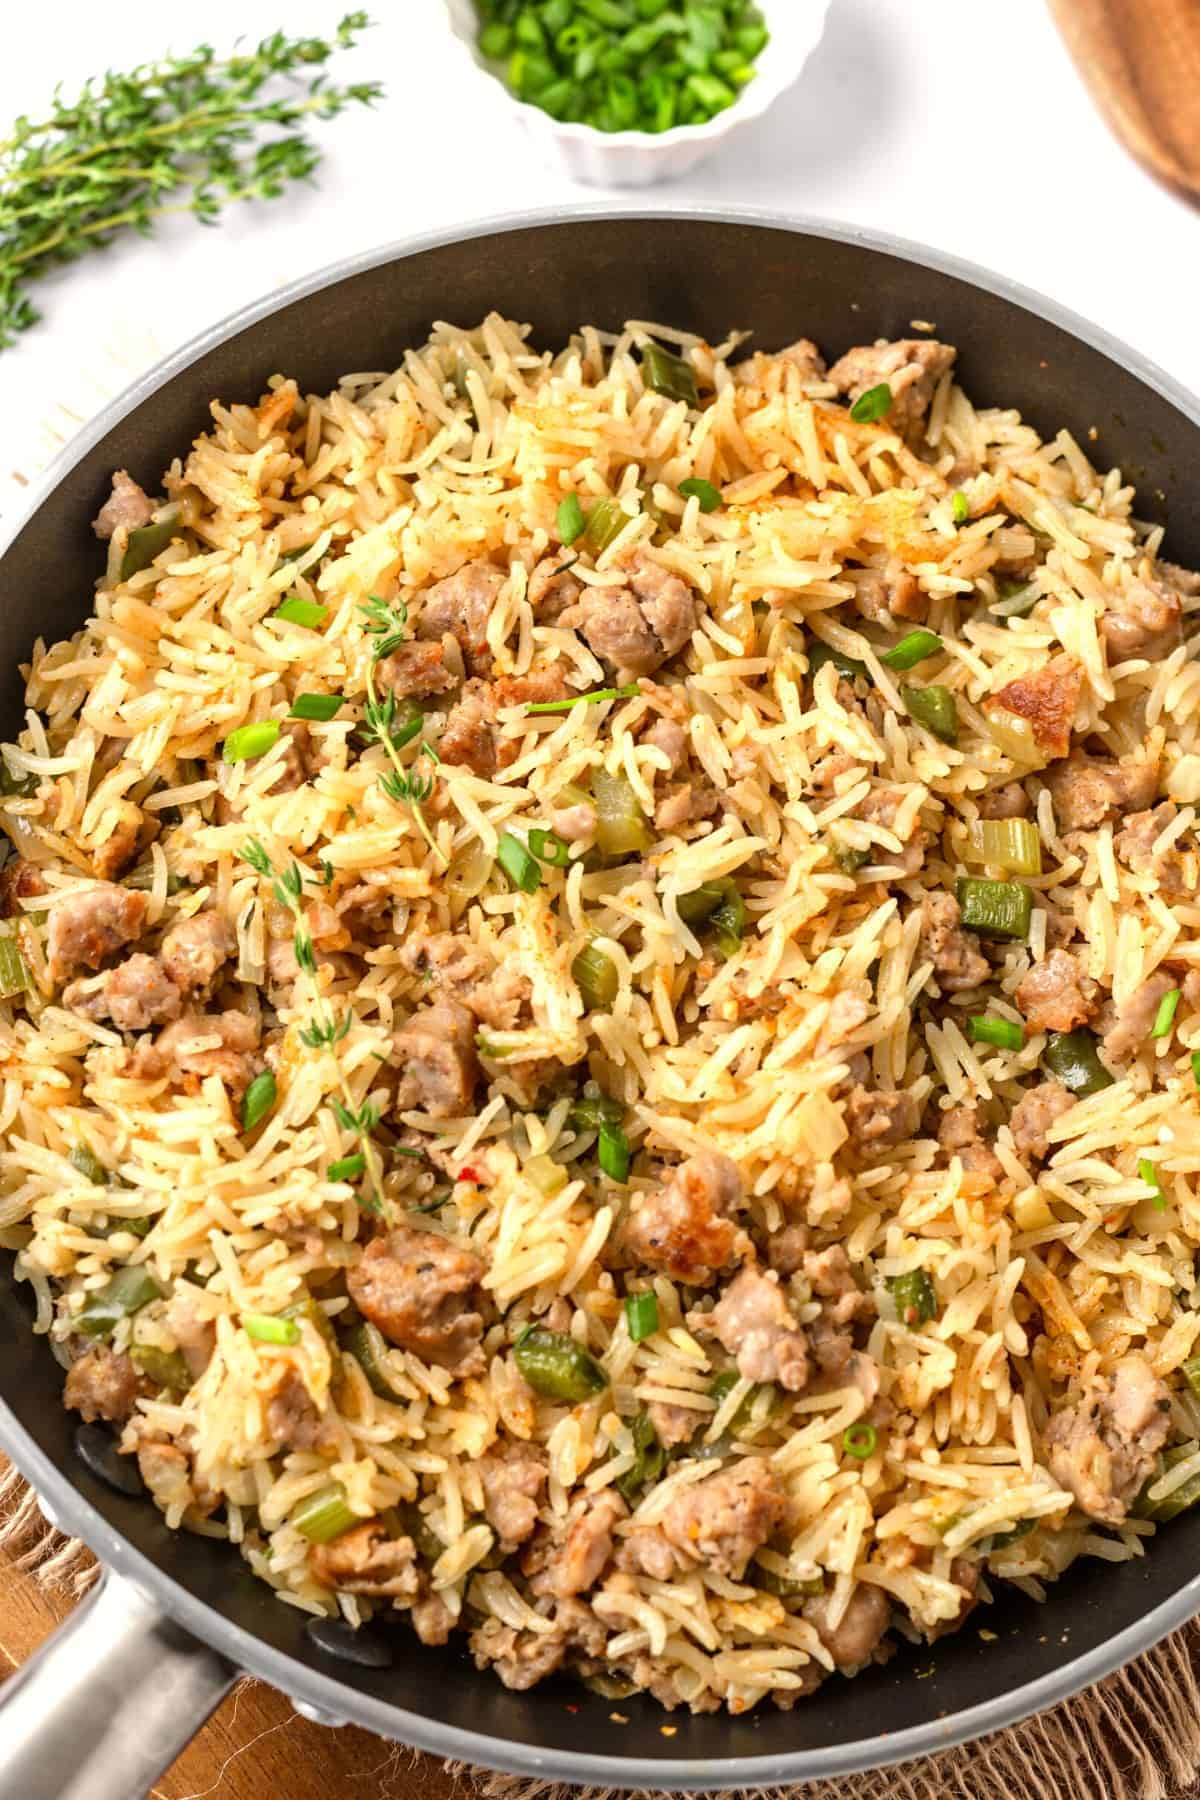 A delicious skillet with rice and savory ground sausage.